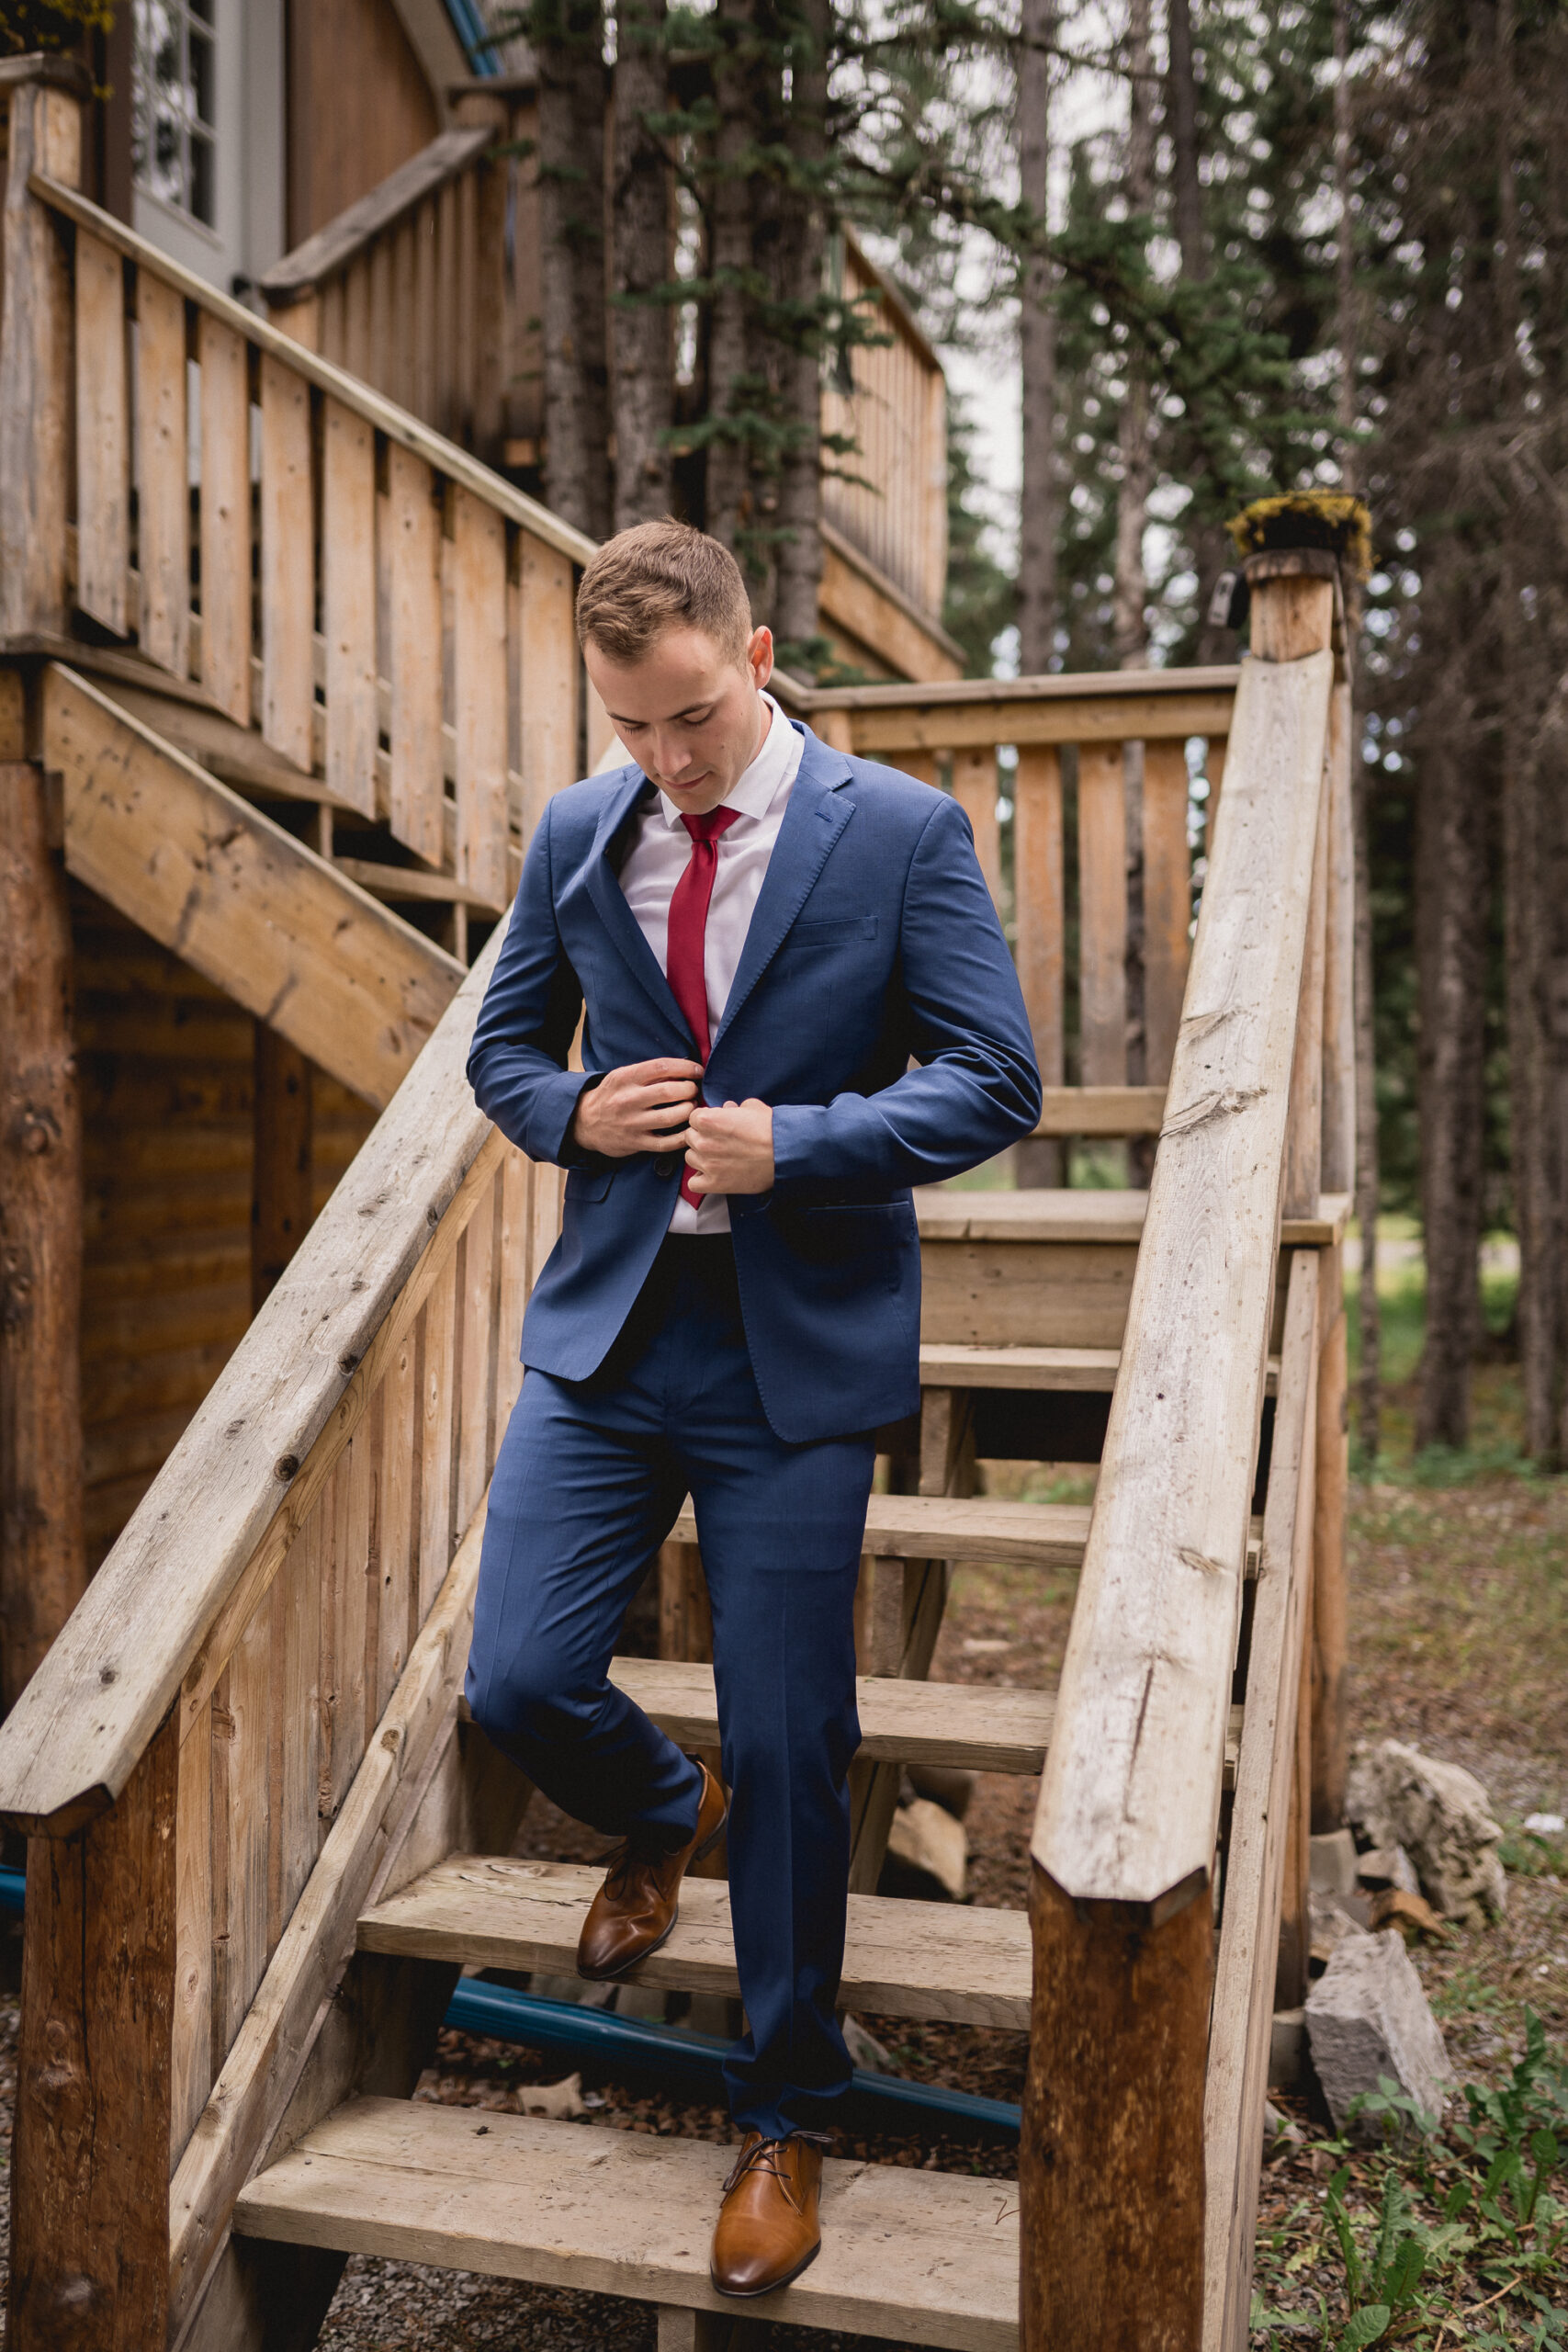 Groom in a blue suit with a red tie walking down stairs towards his wedding